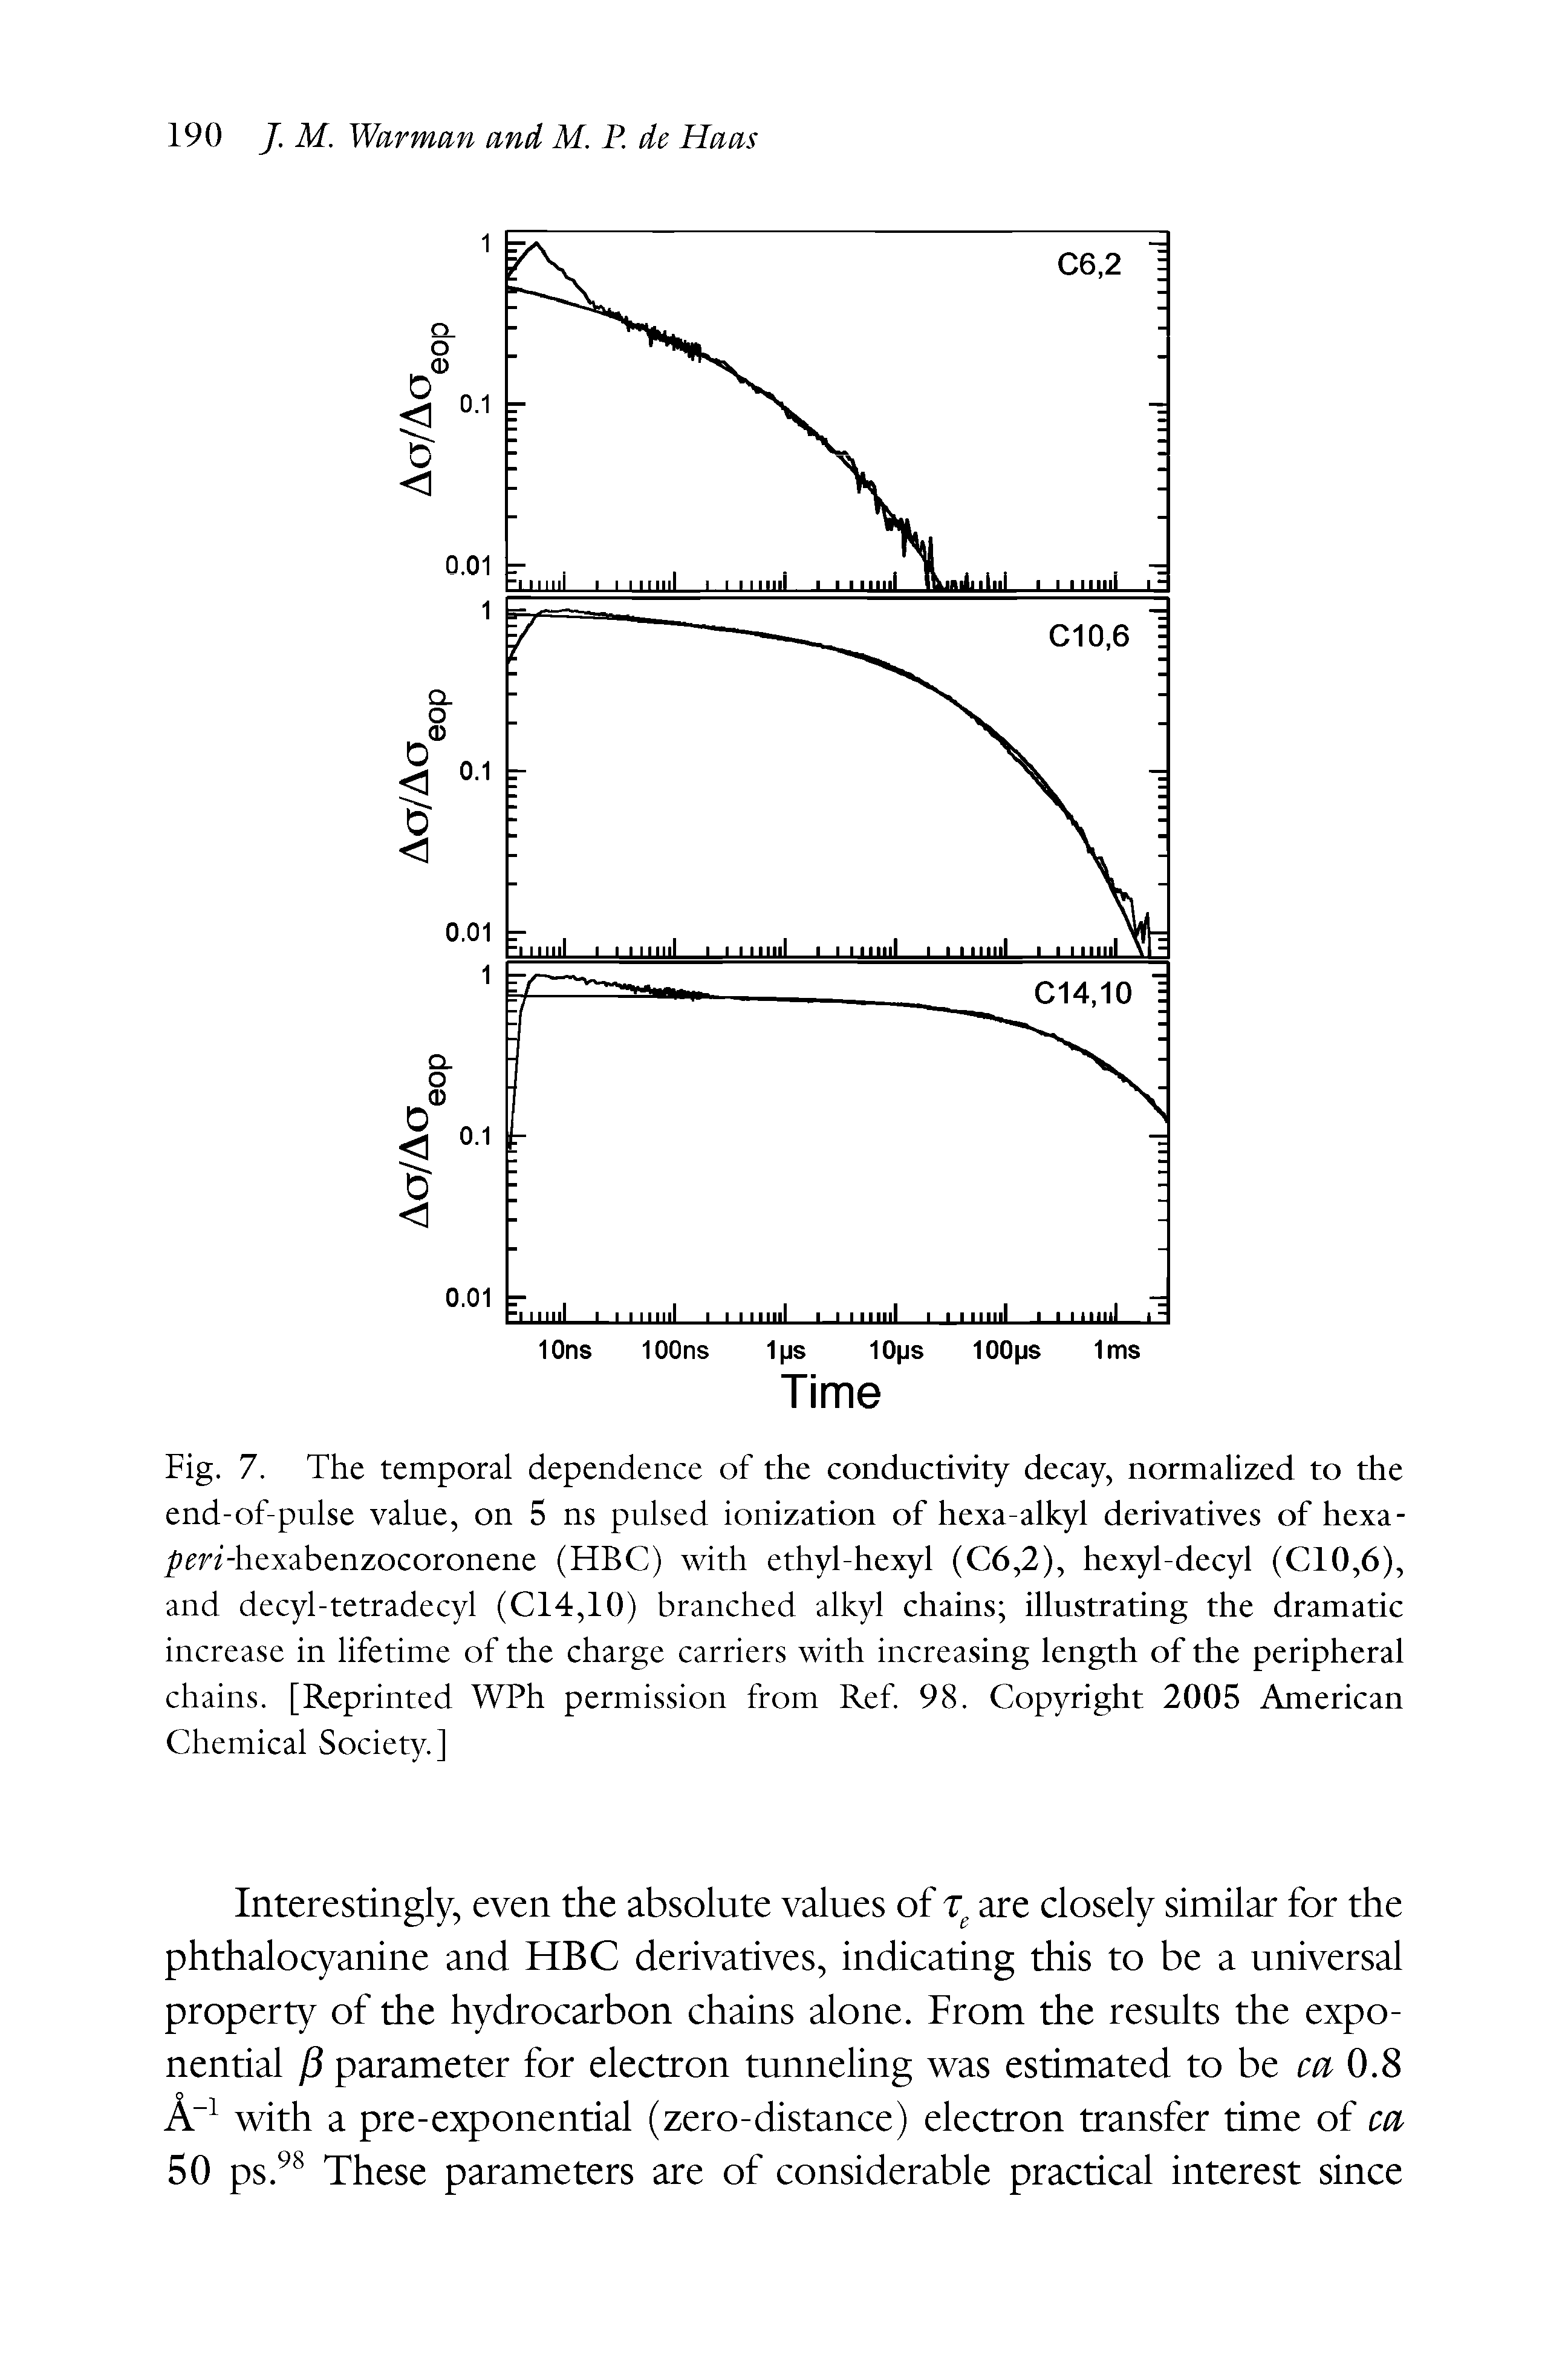 Fig. 7. The temporal dependence of the conductivity decay, normalized to the end-of-pulse value, on 5 ns pulsed ionization of hexa-alkyl derivatives of hexa- m -hexabenzocoronene (HBC) with ethyl-hexyl (C6,2), hexyl-decyl (C10,6), and decyl-tetradecyl (C14,10) branched alkyl chains illustrating the dramatic increase in lifetime of the charge carriers with increasing length of the peripheral chains. [Reprinted WPh permission from Ref. 98. Copyright 2005 American Chemical Society.]...